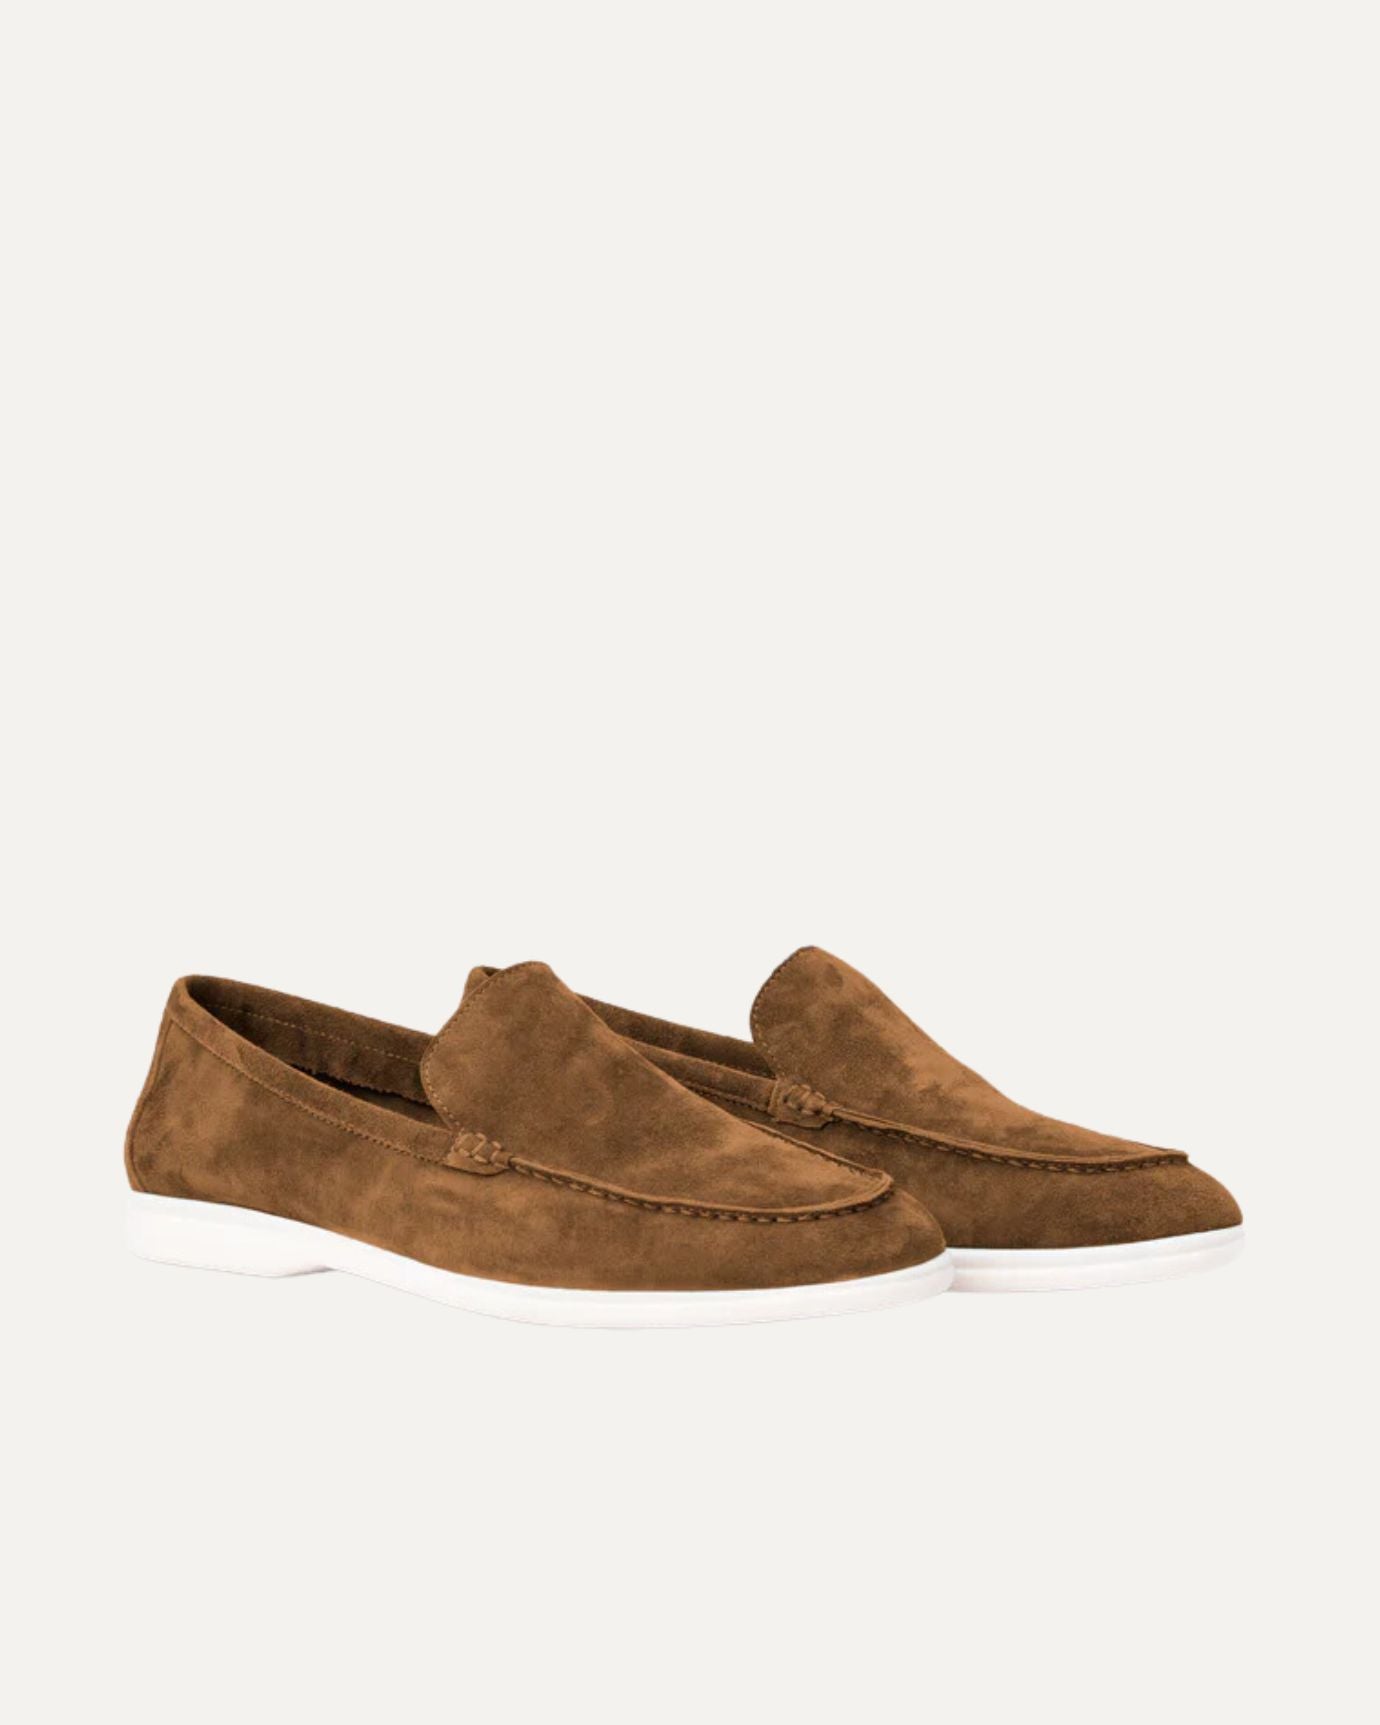 Lovau Portofino Suede Old Money Loafers Leather - Brown